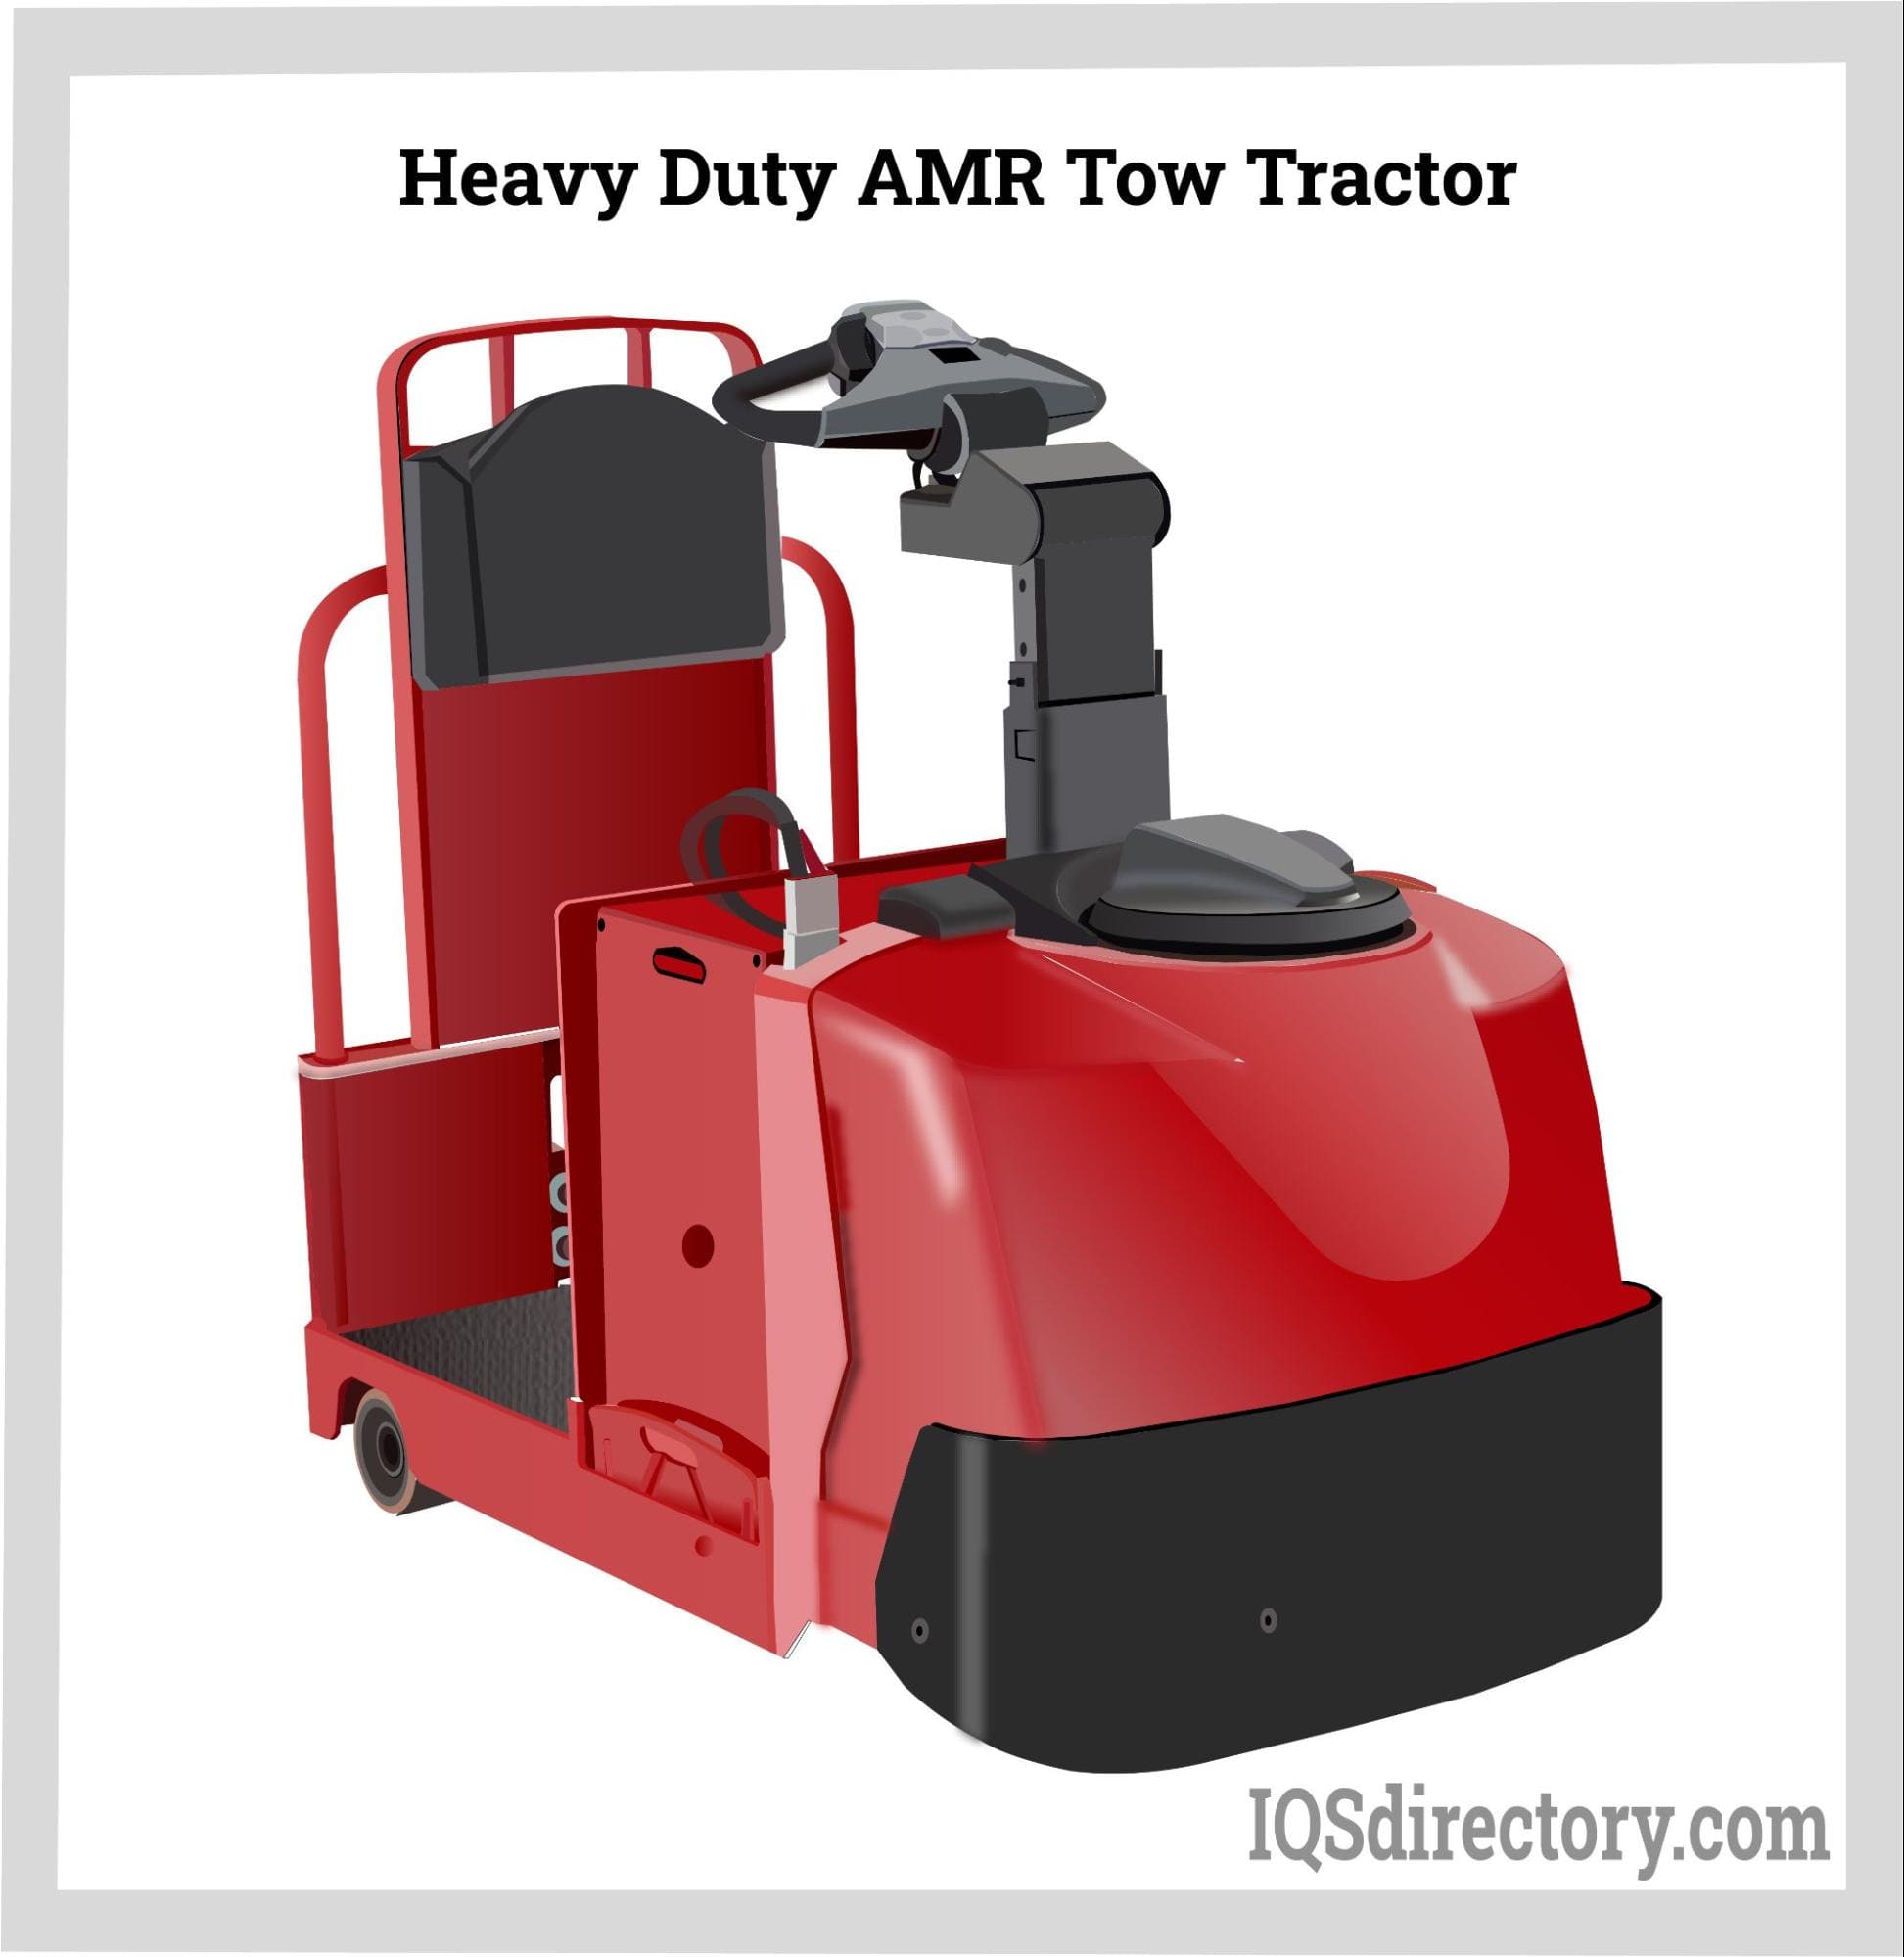 Heavy Duty AMR Tow Tractor